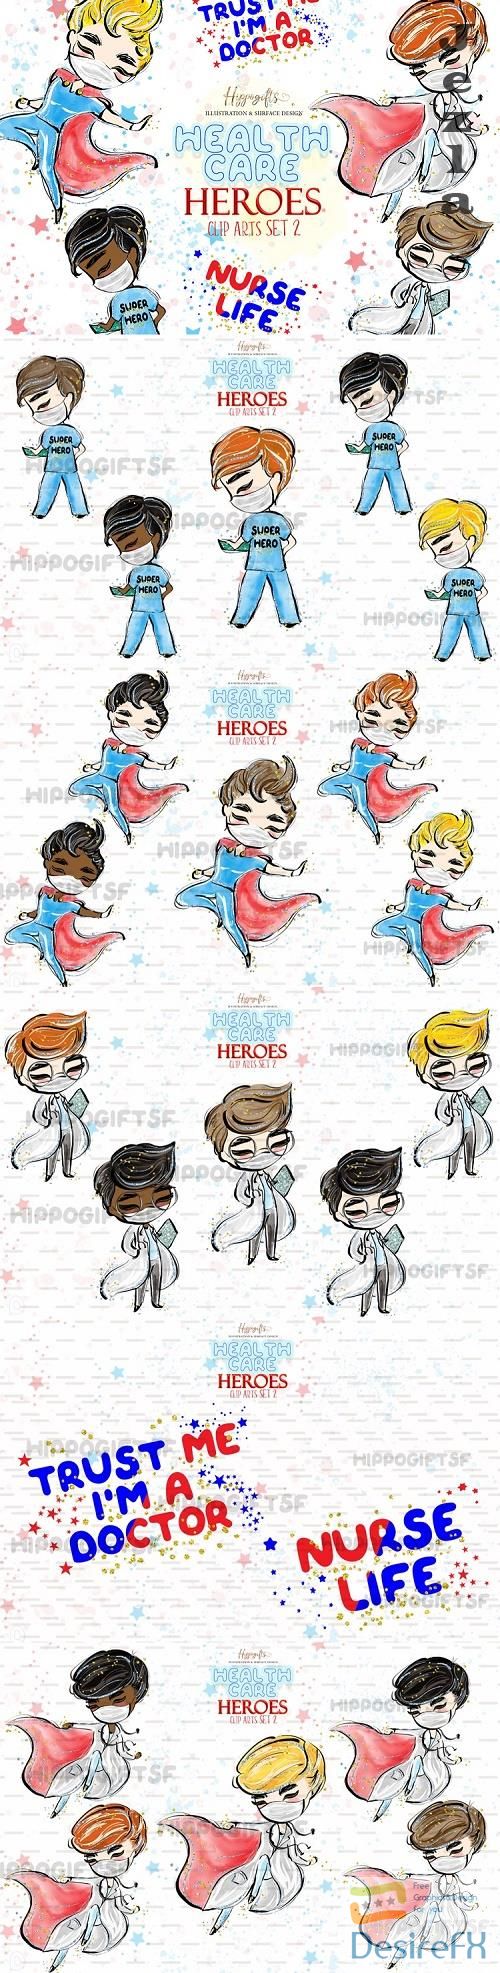 Health care heroes cliparts,male nurse,doctor cliparts - 554056